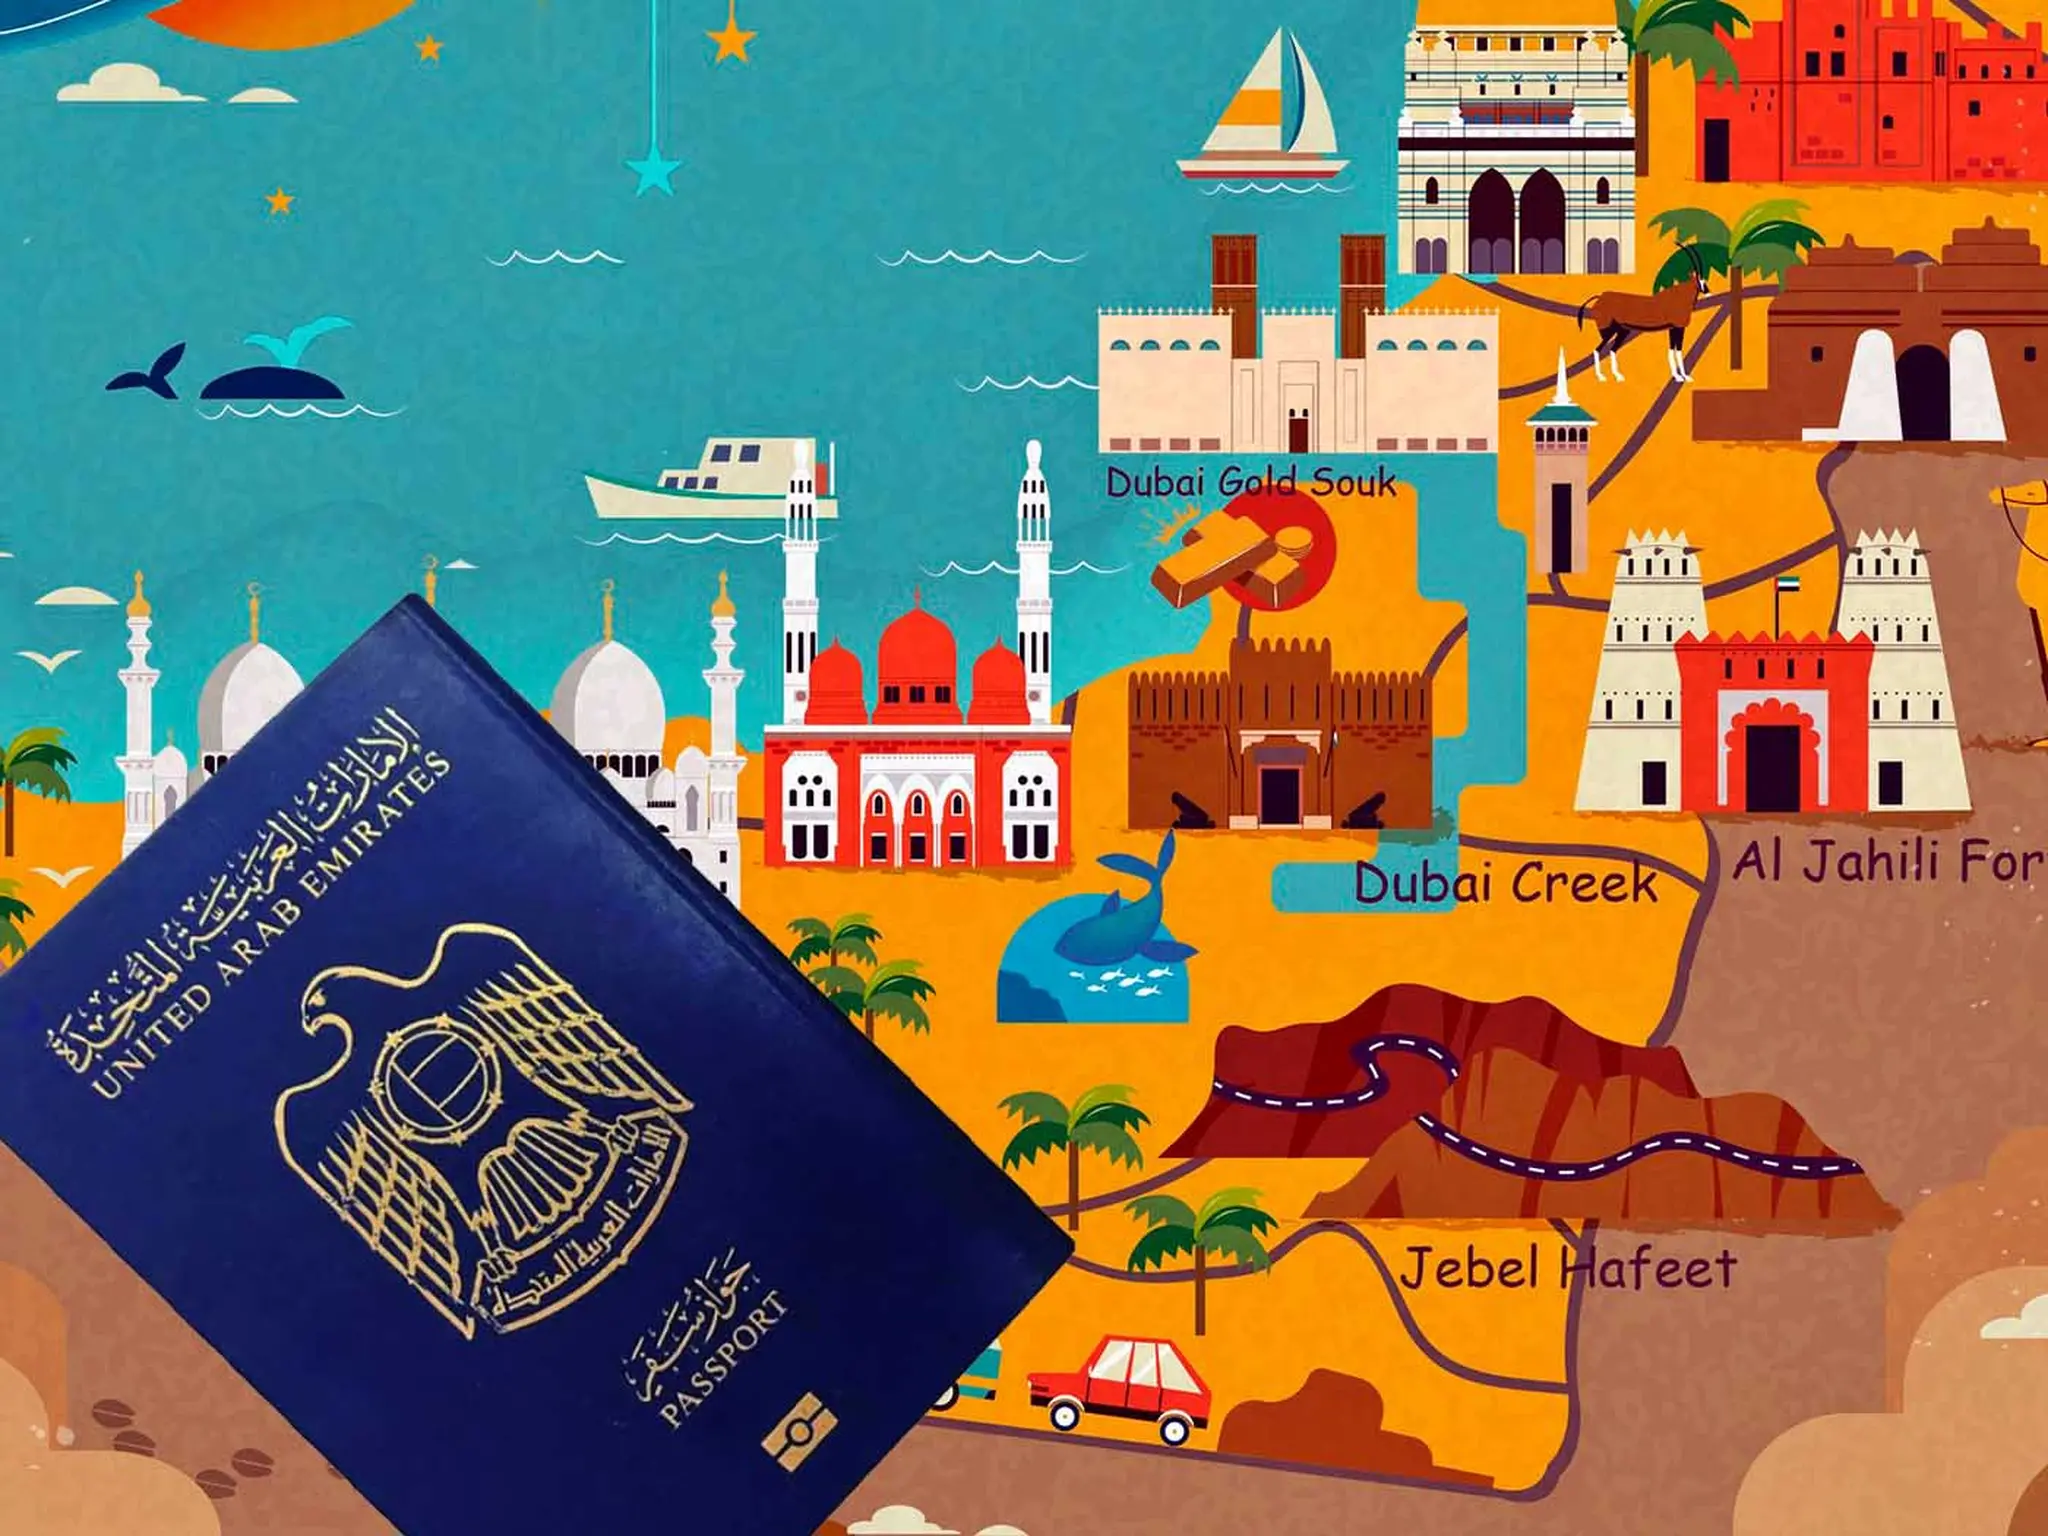 UAE: The fastest way To Renew your passport in just 8 minutes